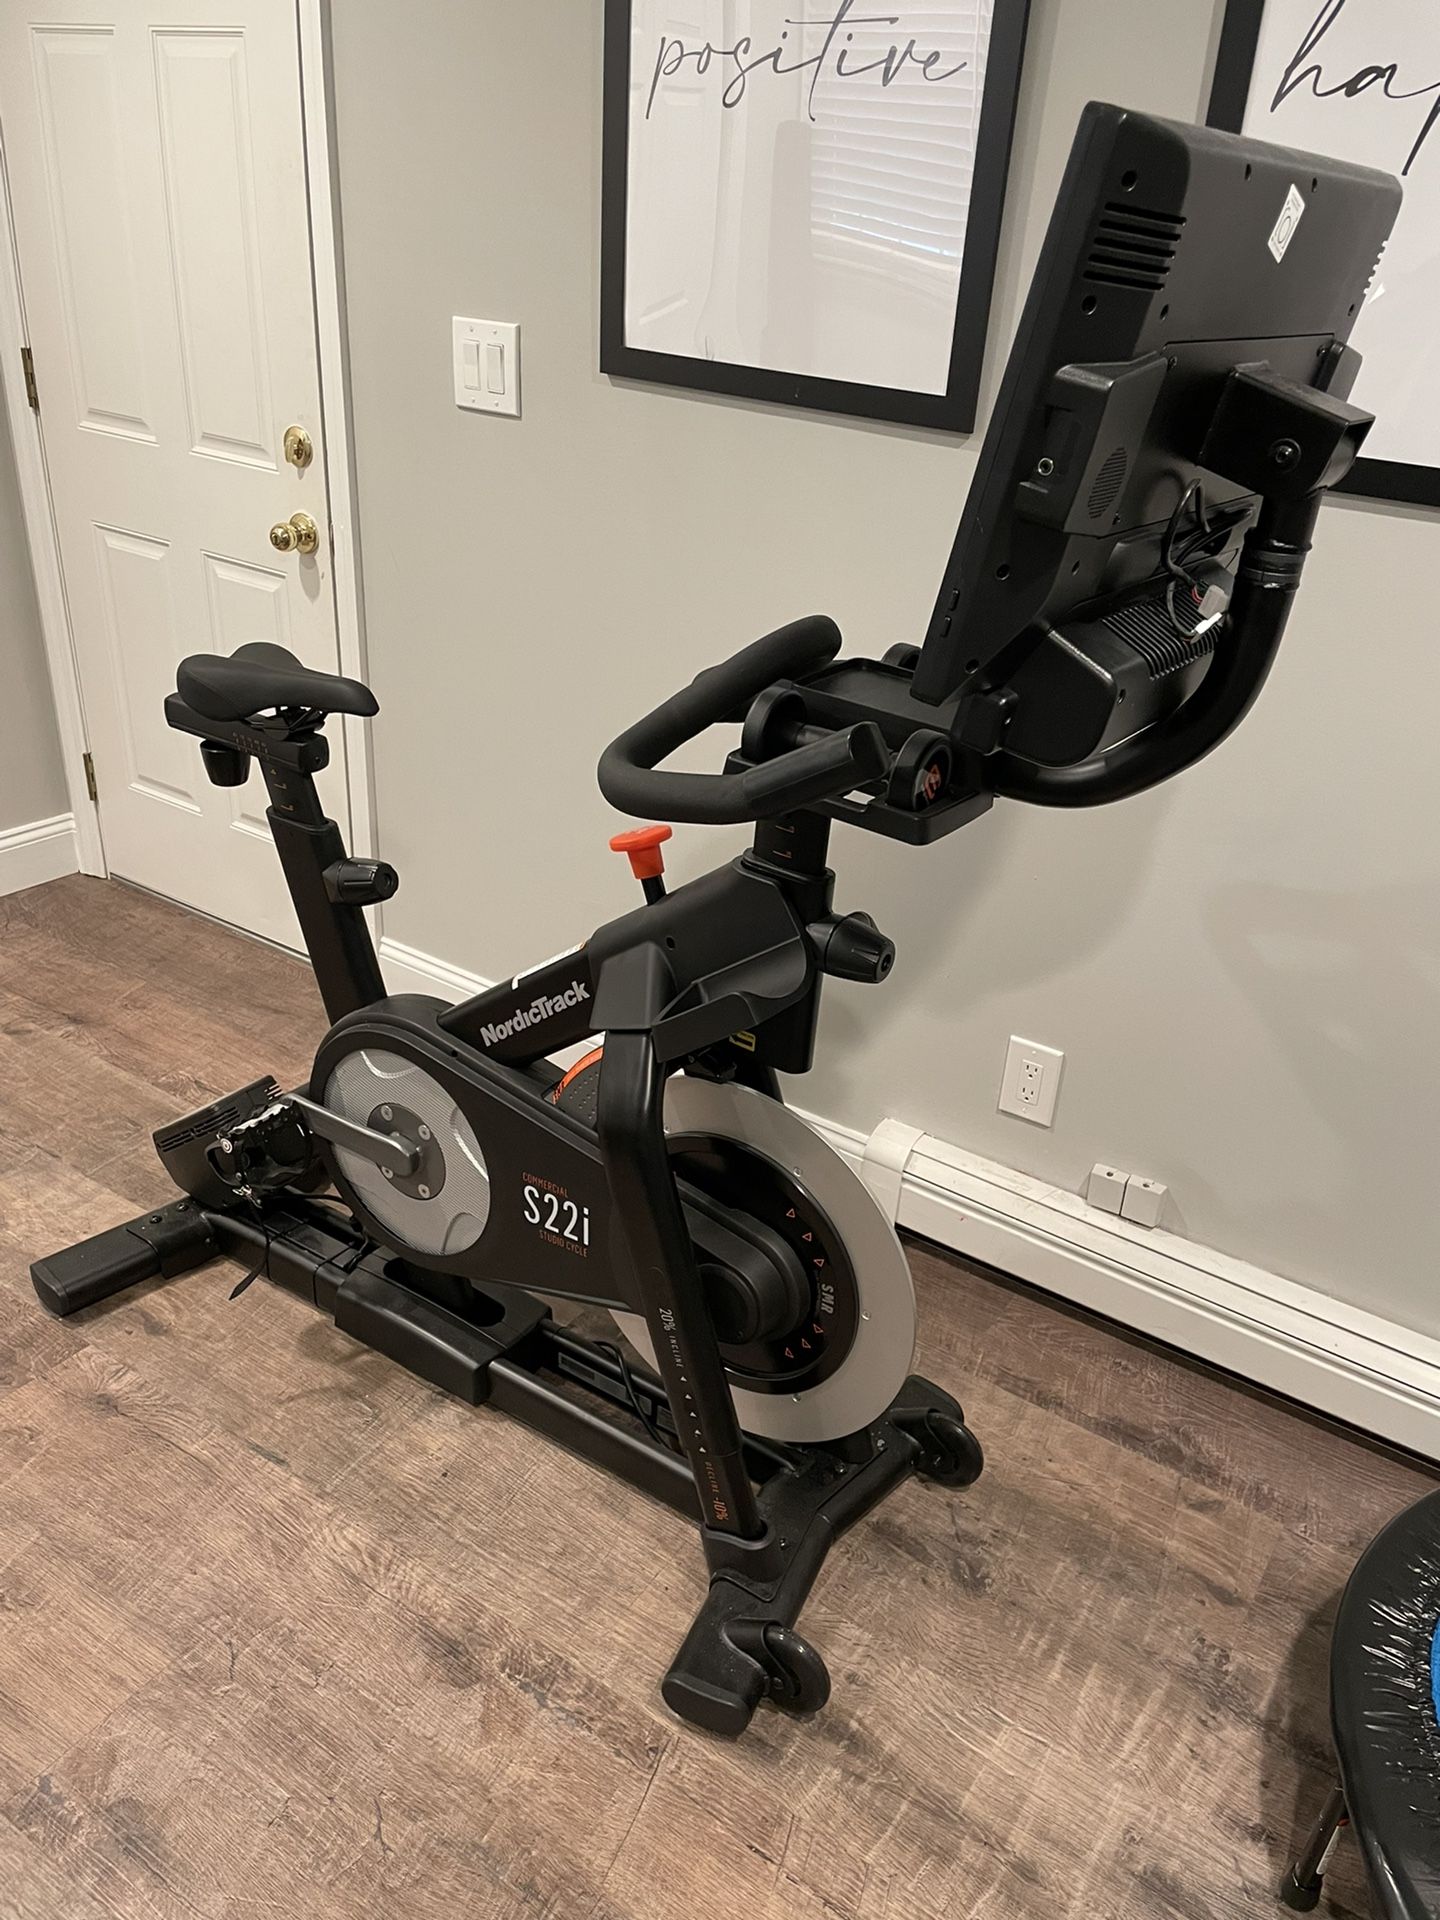 Nordictrack S22i Studio Cycle- 4 Year Warranty Included